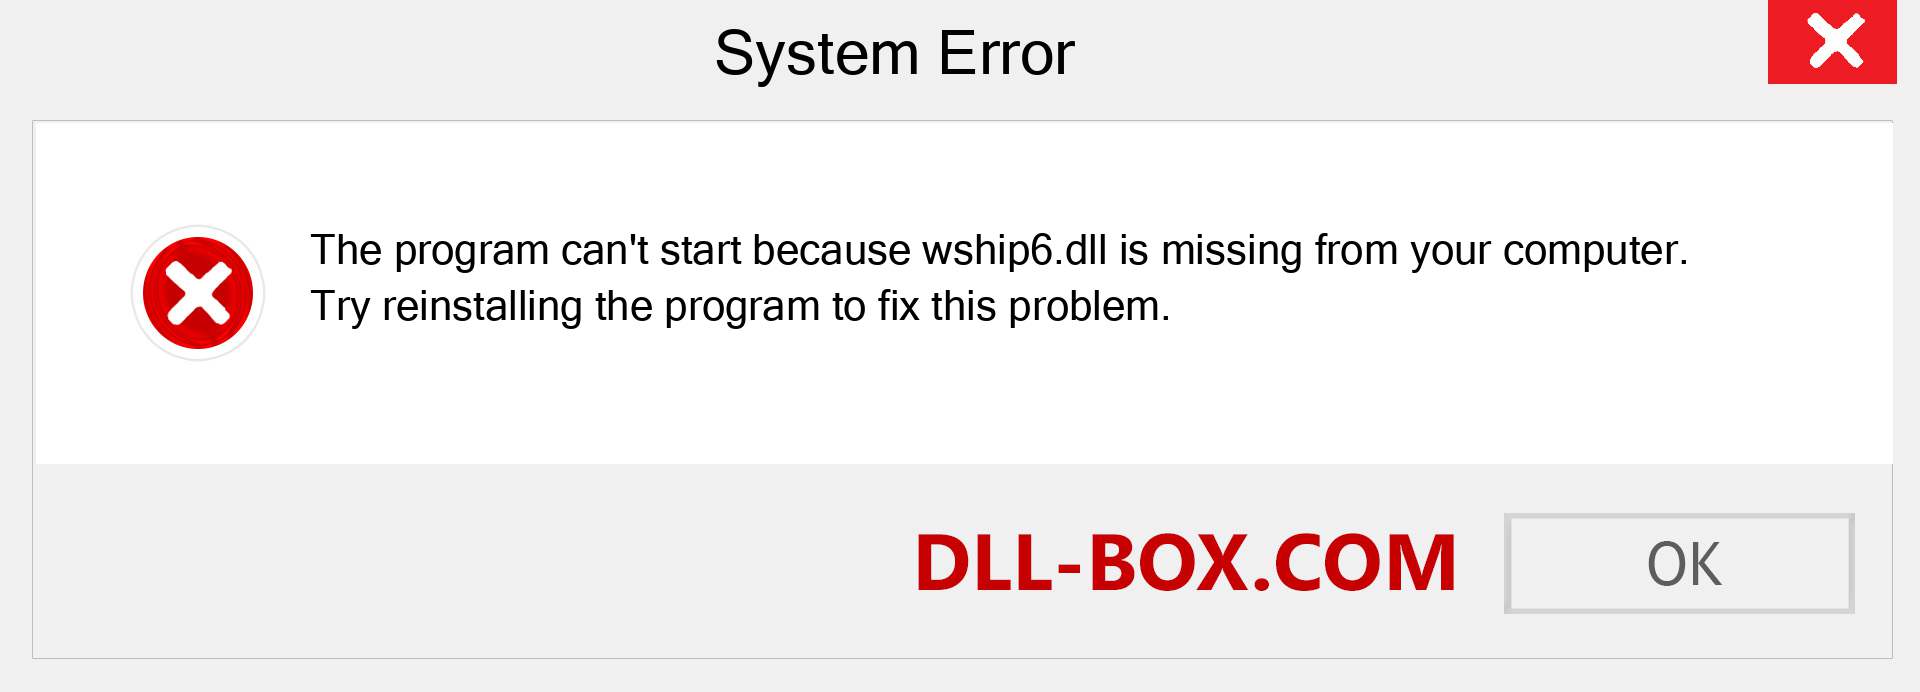  wship6.dll file is missing?. Download for Windows 7, 8, 10 - Fix  wship6 dll Missing Error on Windows, photos, images